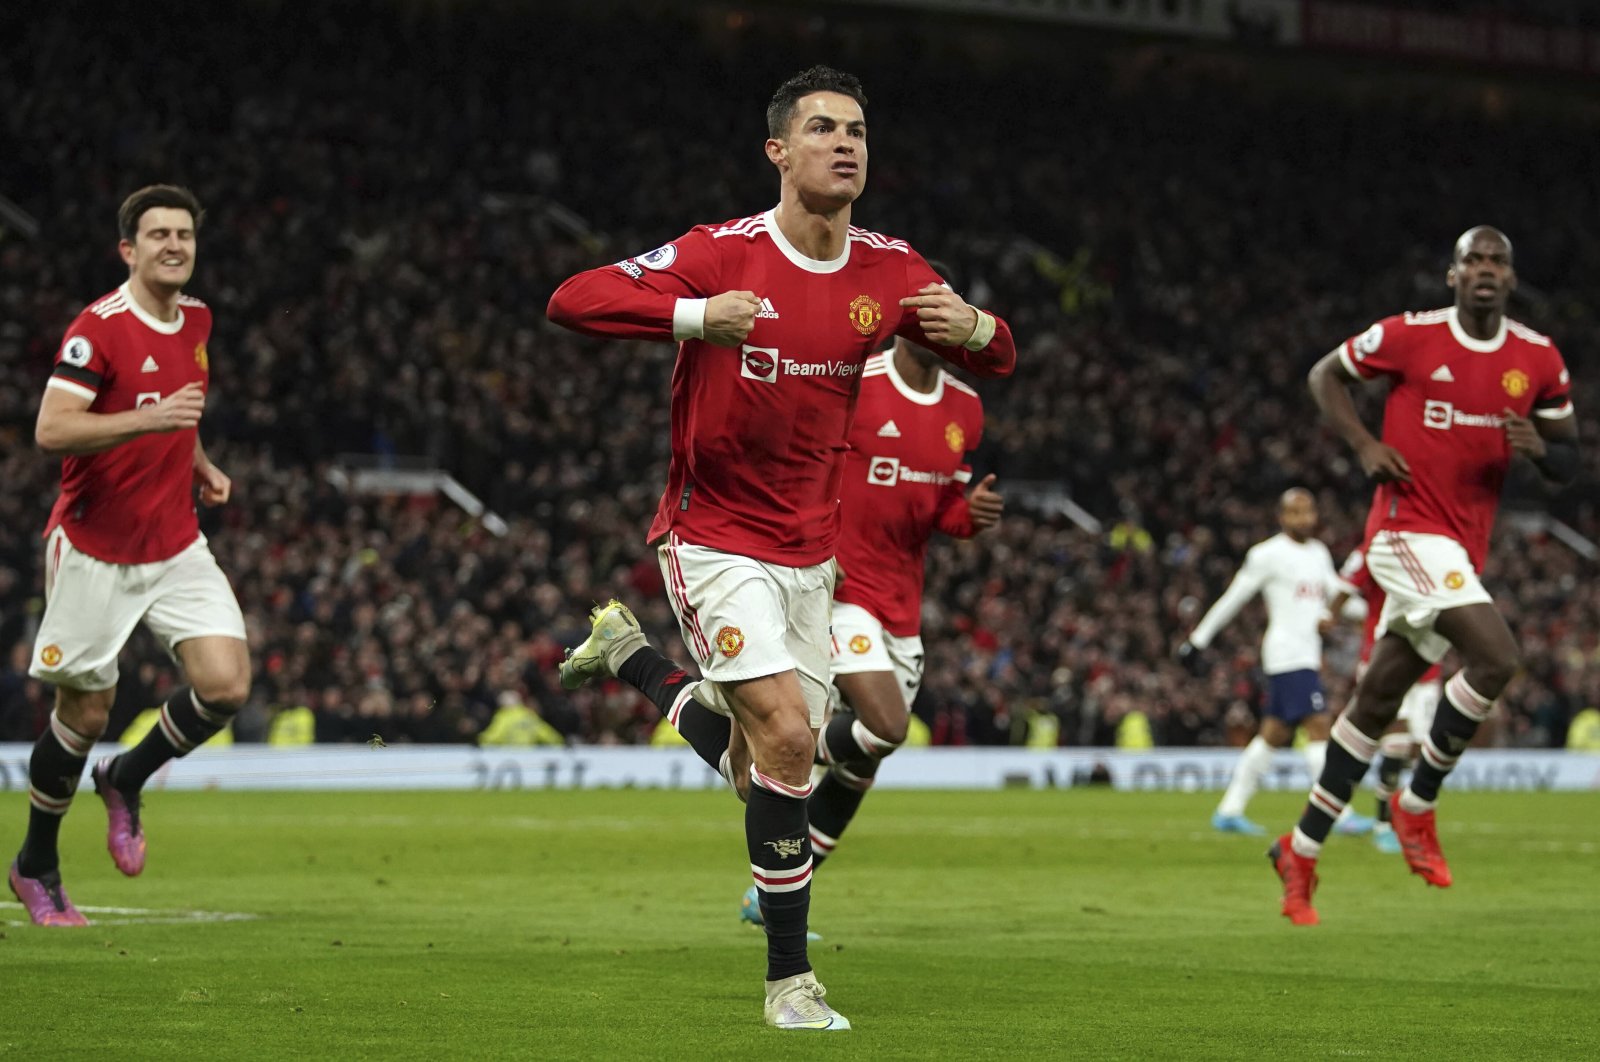 Manchester United&#039;s Cristiano Ronaldo (C) celebrates after scoring in a Premier League match against Tottenham Hotspur, Manchester, England, March 12, 2022. (AP Photo)